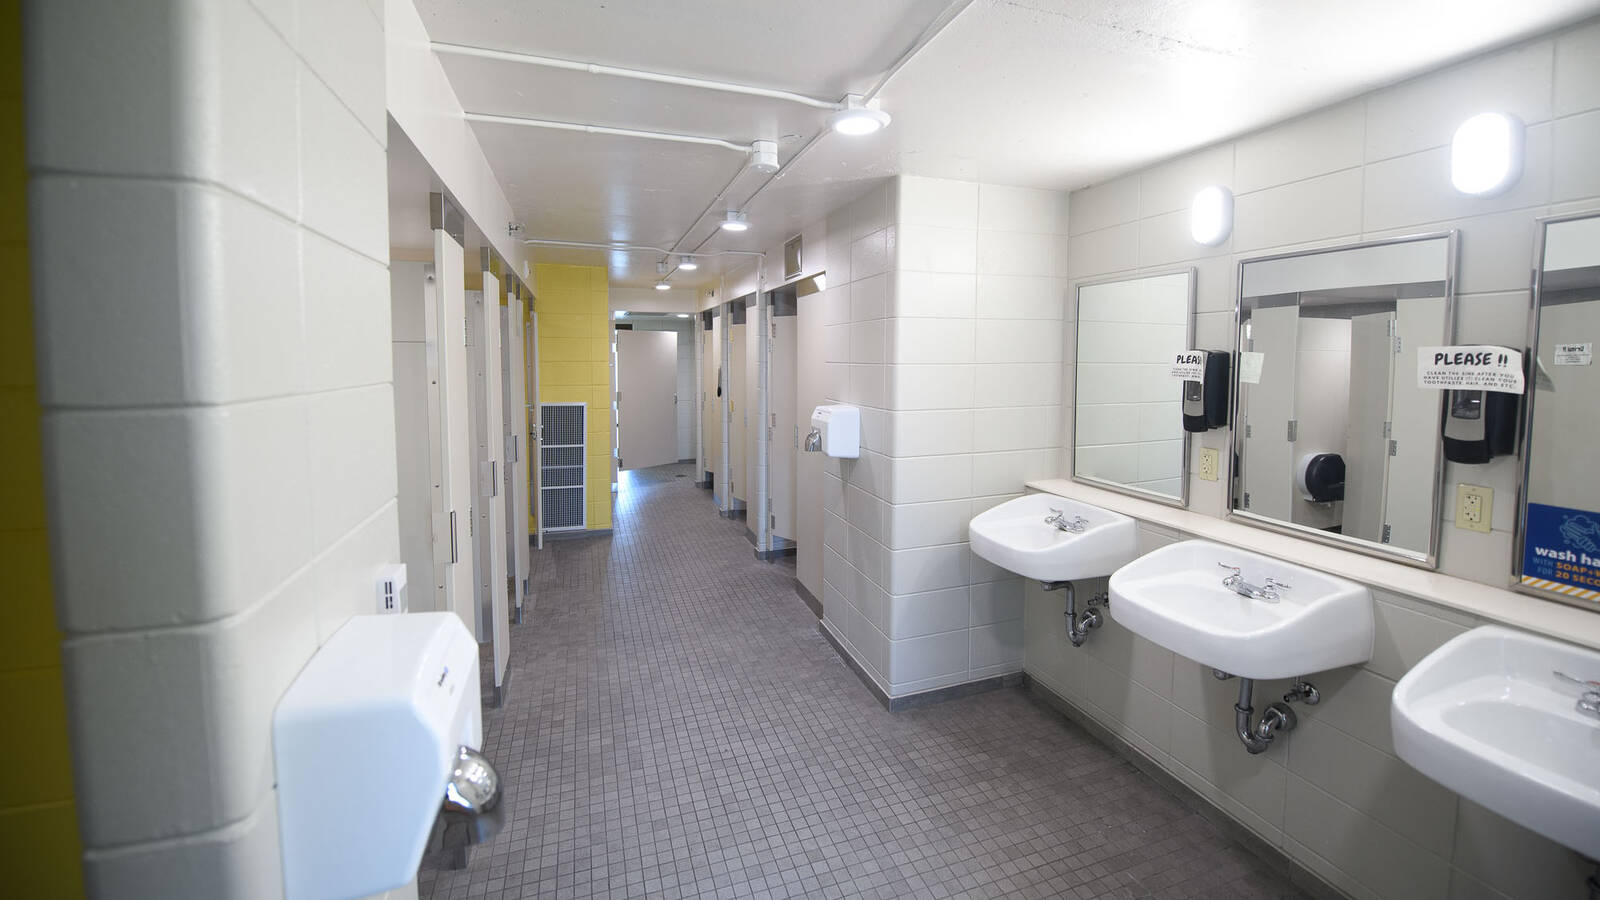 Bathroom in Towers Hall with sinks, stalls, and showers.